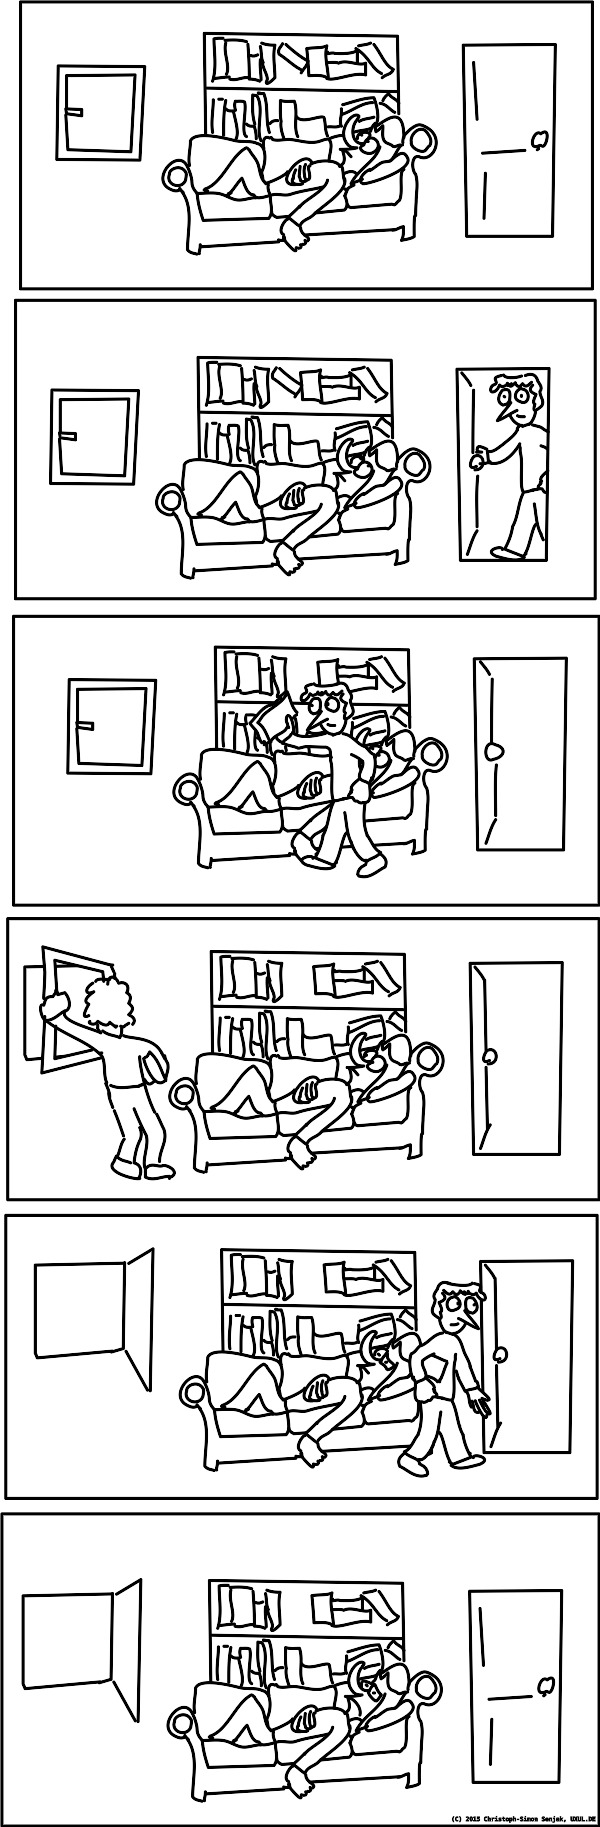 Panel 1: A person lies on a couch. Behind the couch, there is a book shelf. On the right side is a closed door. On the left side is a closed window. -- Panel 2: The door opens and a second person comes in. -- Panel 3: The second person takes a book from the shelf. -- Panel 4: The second person opens the window. -- Panel 5: The second person leaves the room again. Panel 6: The door is closed. The window is open. The second person has left the room. The person on the couch looks disappointed.